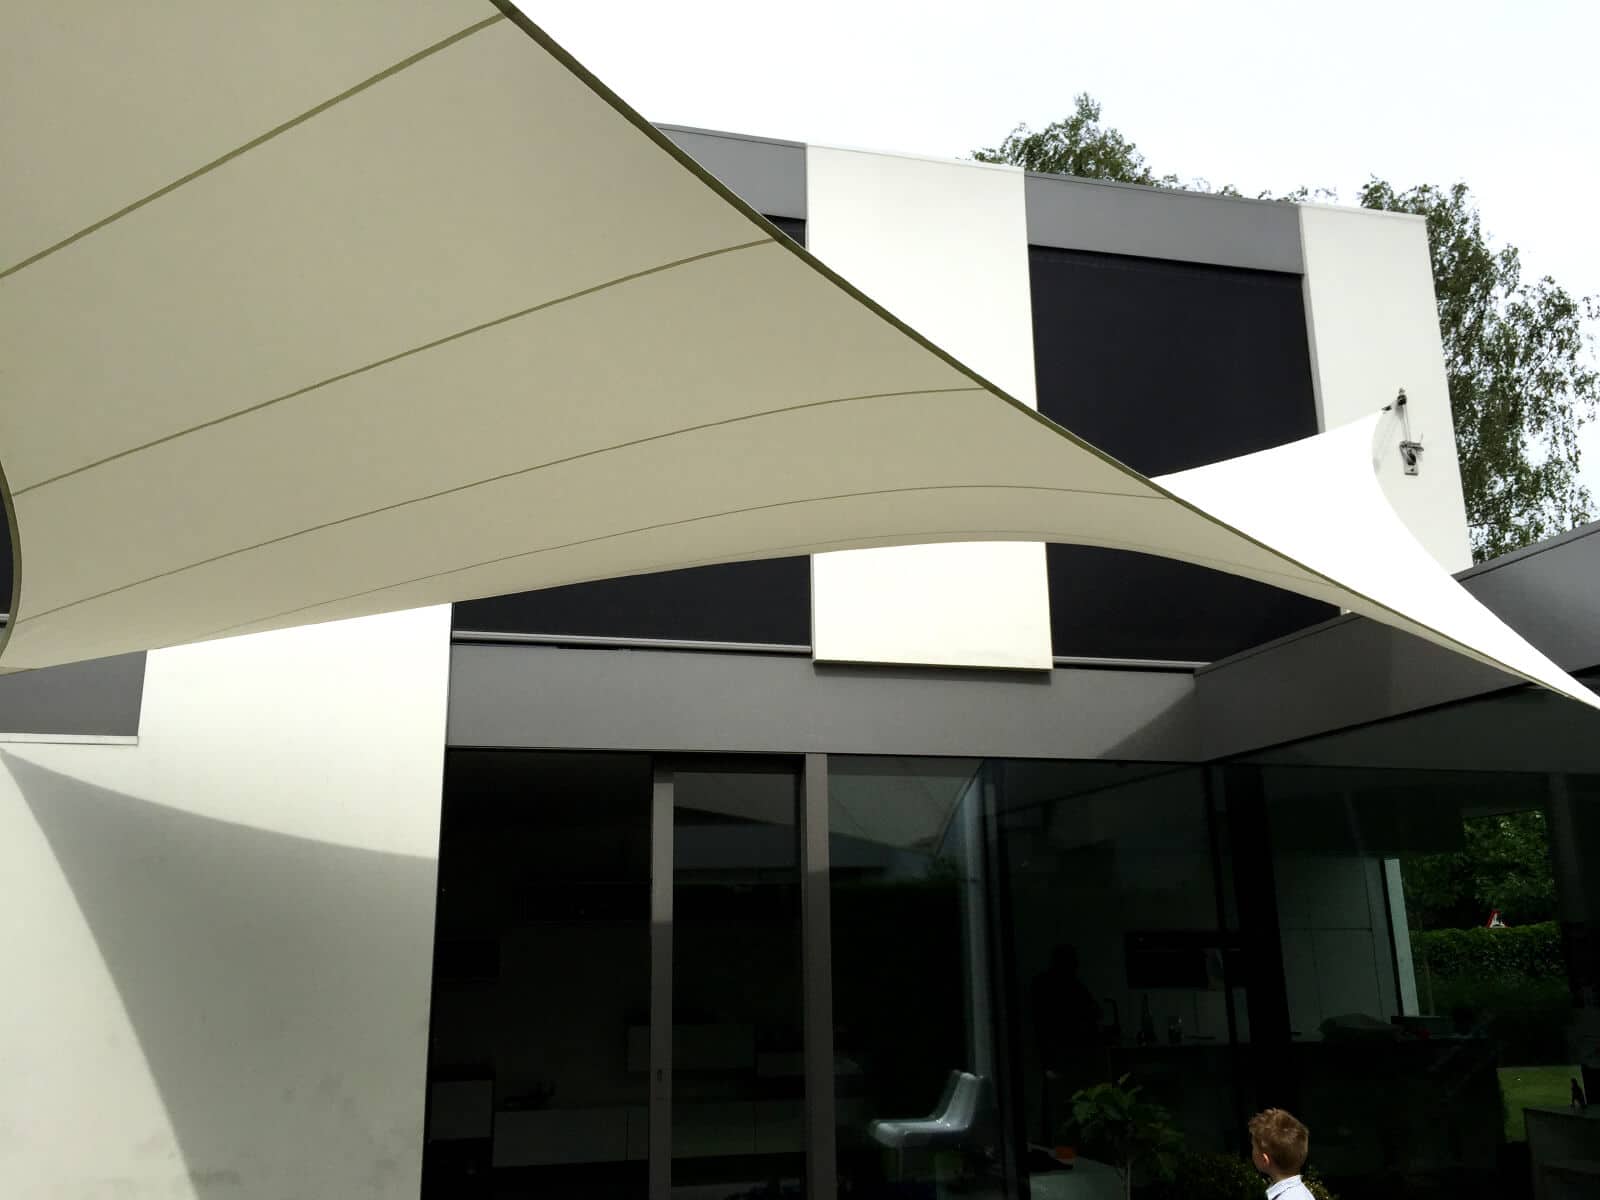 Our textile roof carport is Tailor based on your aesthetic and functional needs